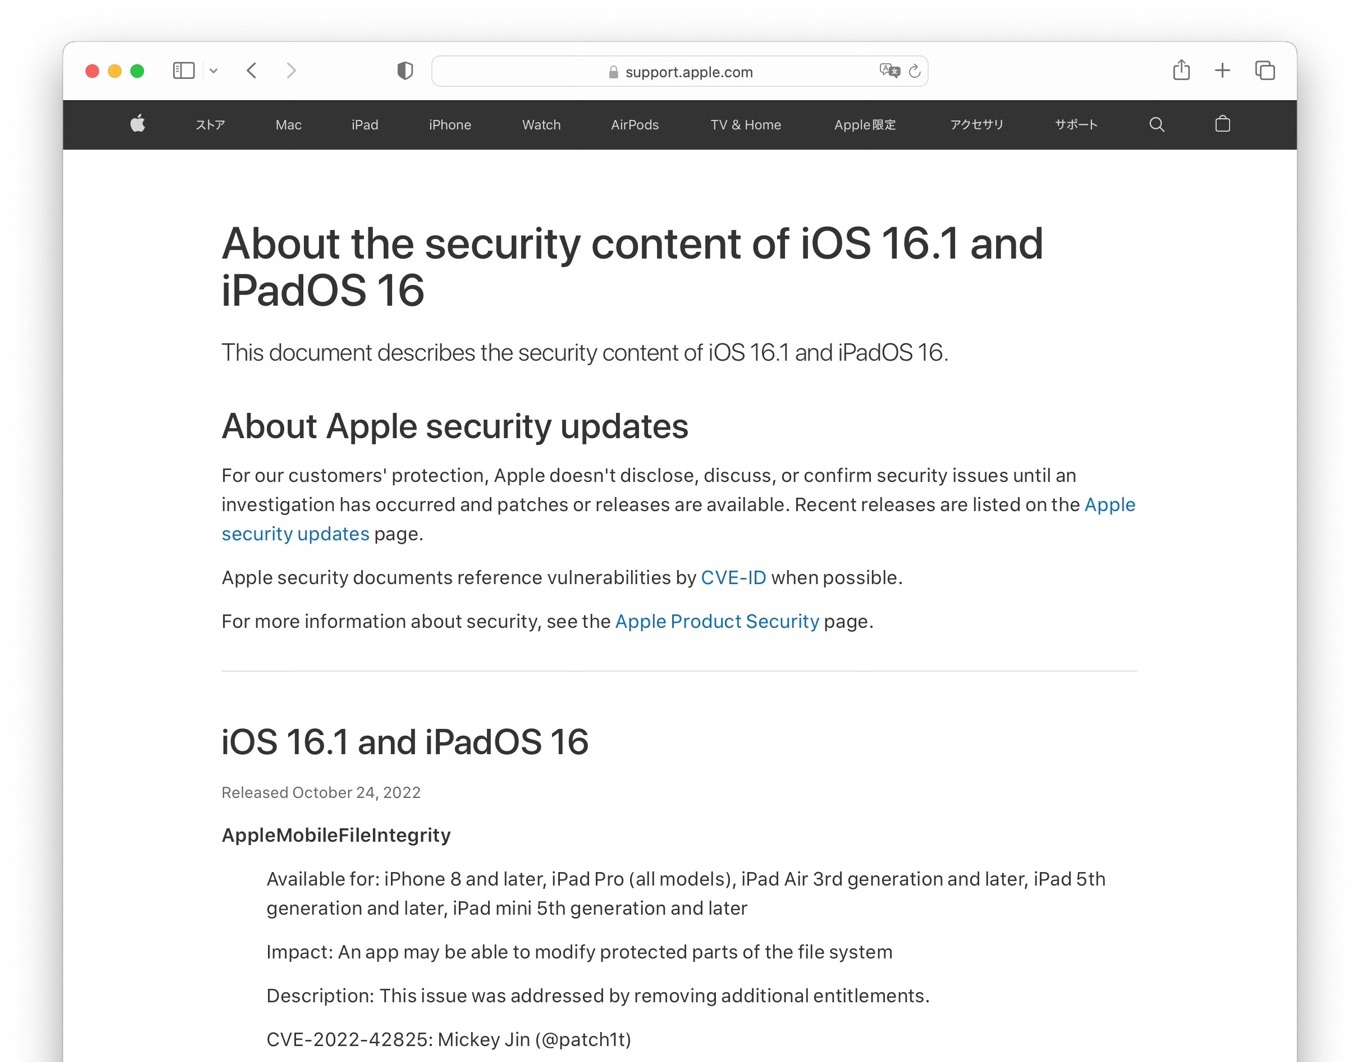 About the security content of iOS 16.1 and iPadOS 16